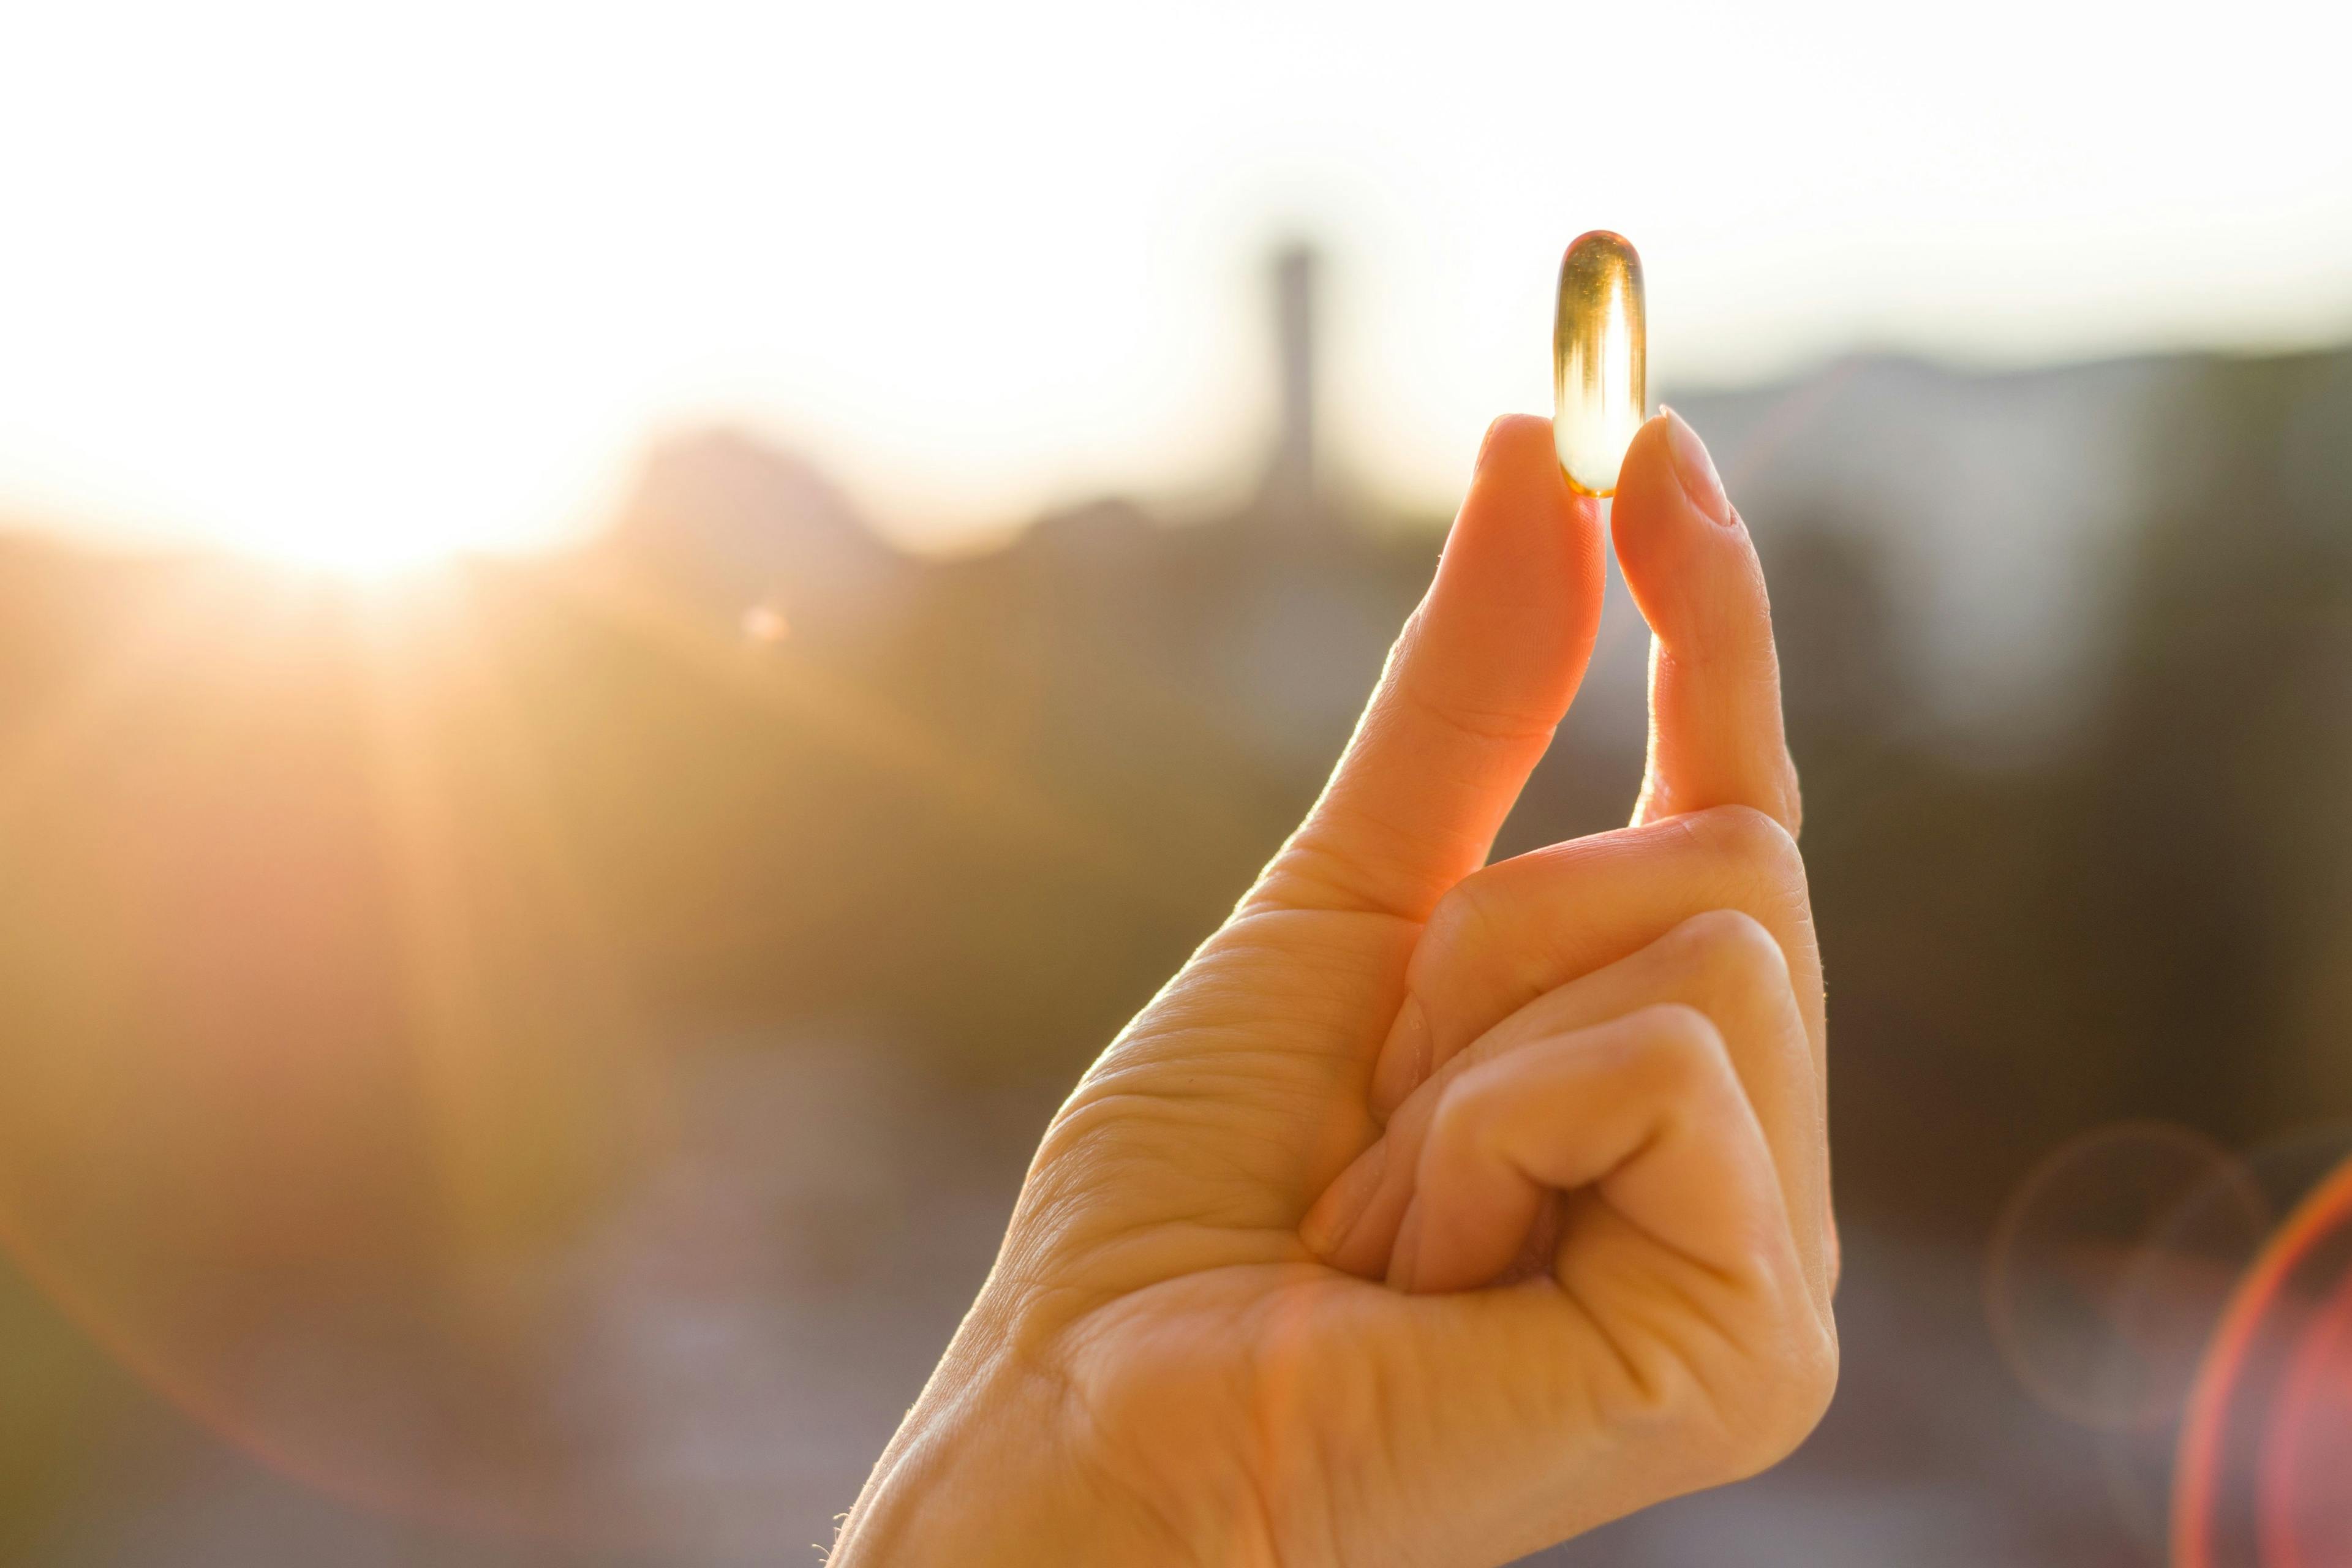 Vitamin D Supplementation May Reduce Incidence of Cardiovascular Events